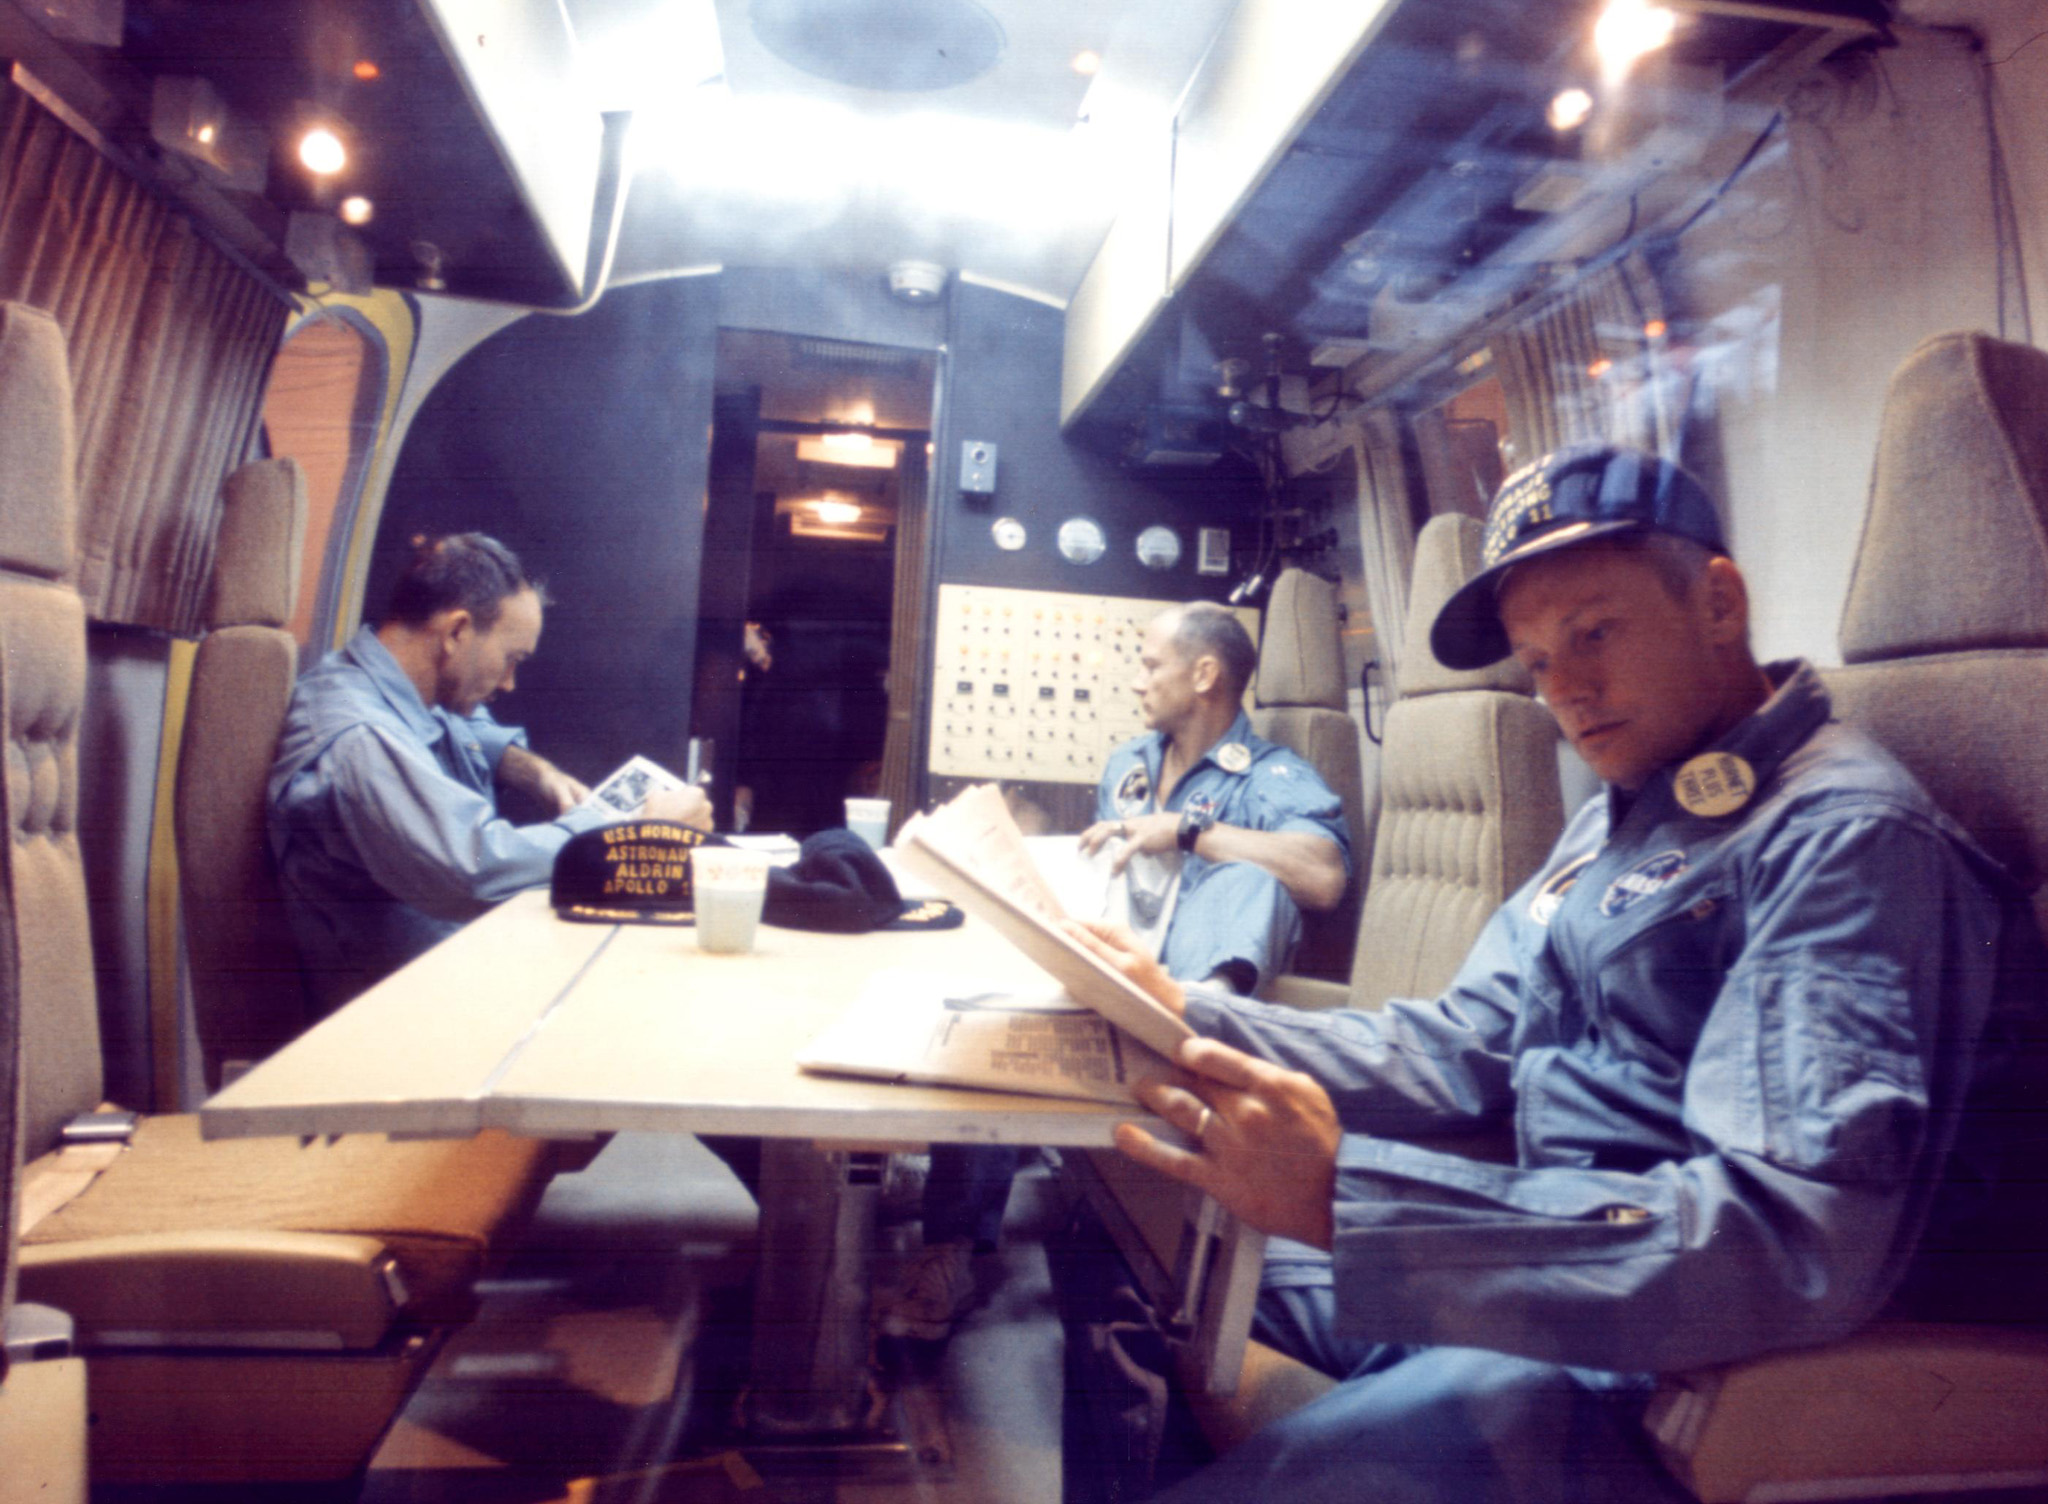 Within the Mobile Quarantine Facility, Apollo 11 astronauts (left to right) Michael Collins, Buzz Aldrin and Neil Armstrong relax following their successful lunar landing mission. They spent two-and-a-half-days in the quarantine trailer en route from the USS Hornet to the Lunar Receiving Laboratory at the Manned Spacecraft Center in Houston. The Hornet docked at Pearl Harbor where the trailer was transferred to a jet aircraft for the flight to Houston.